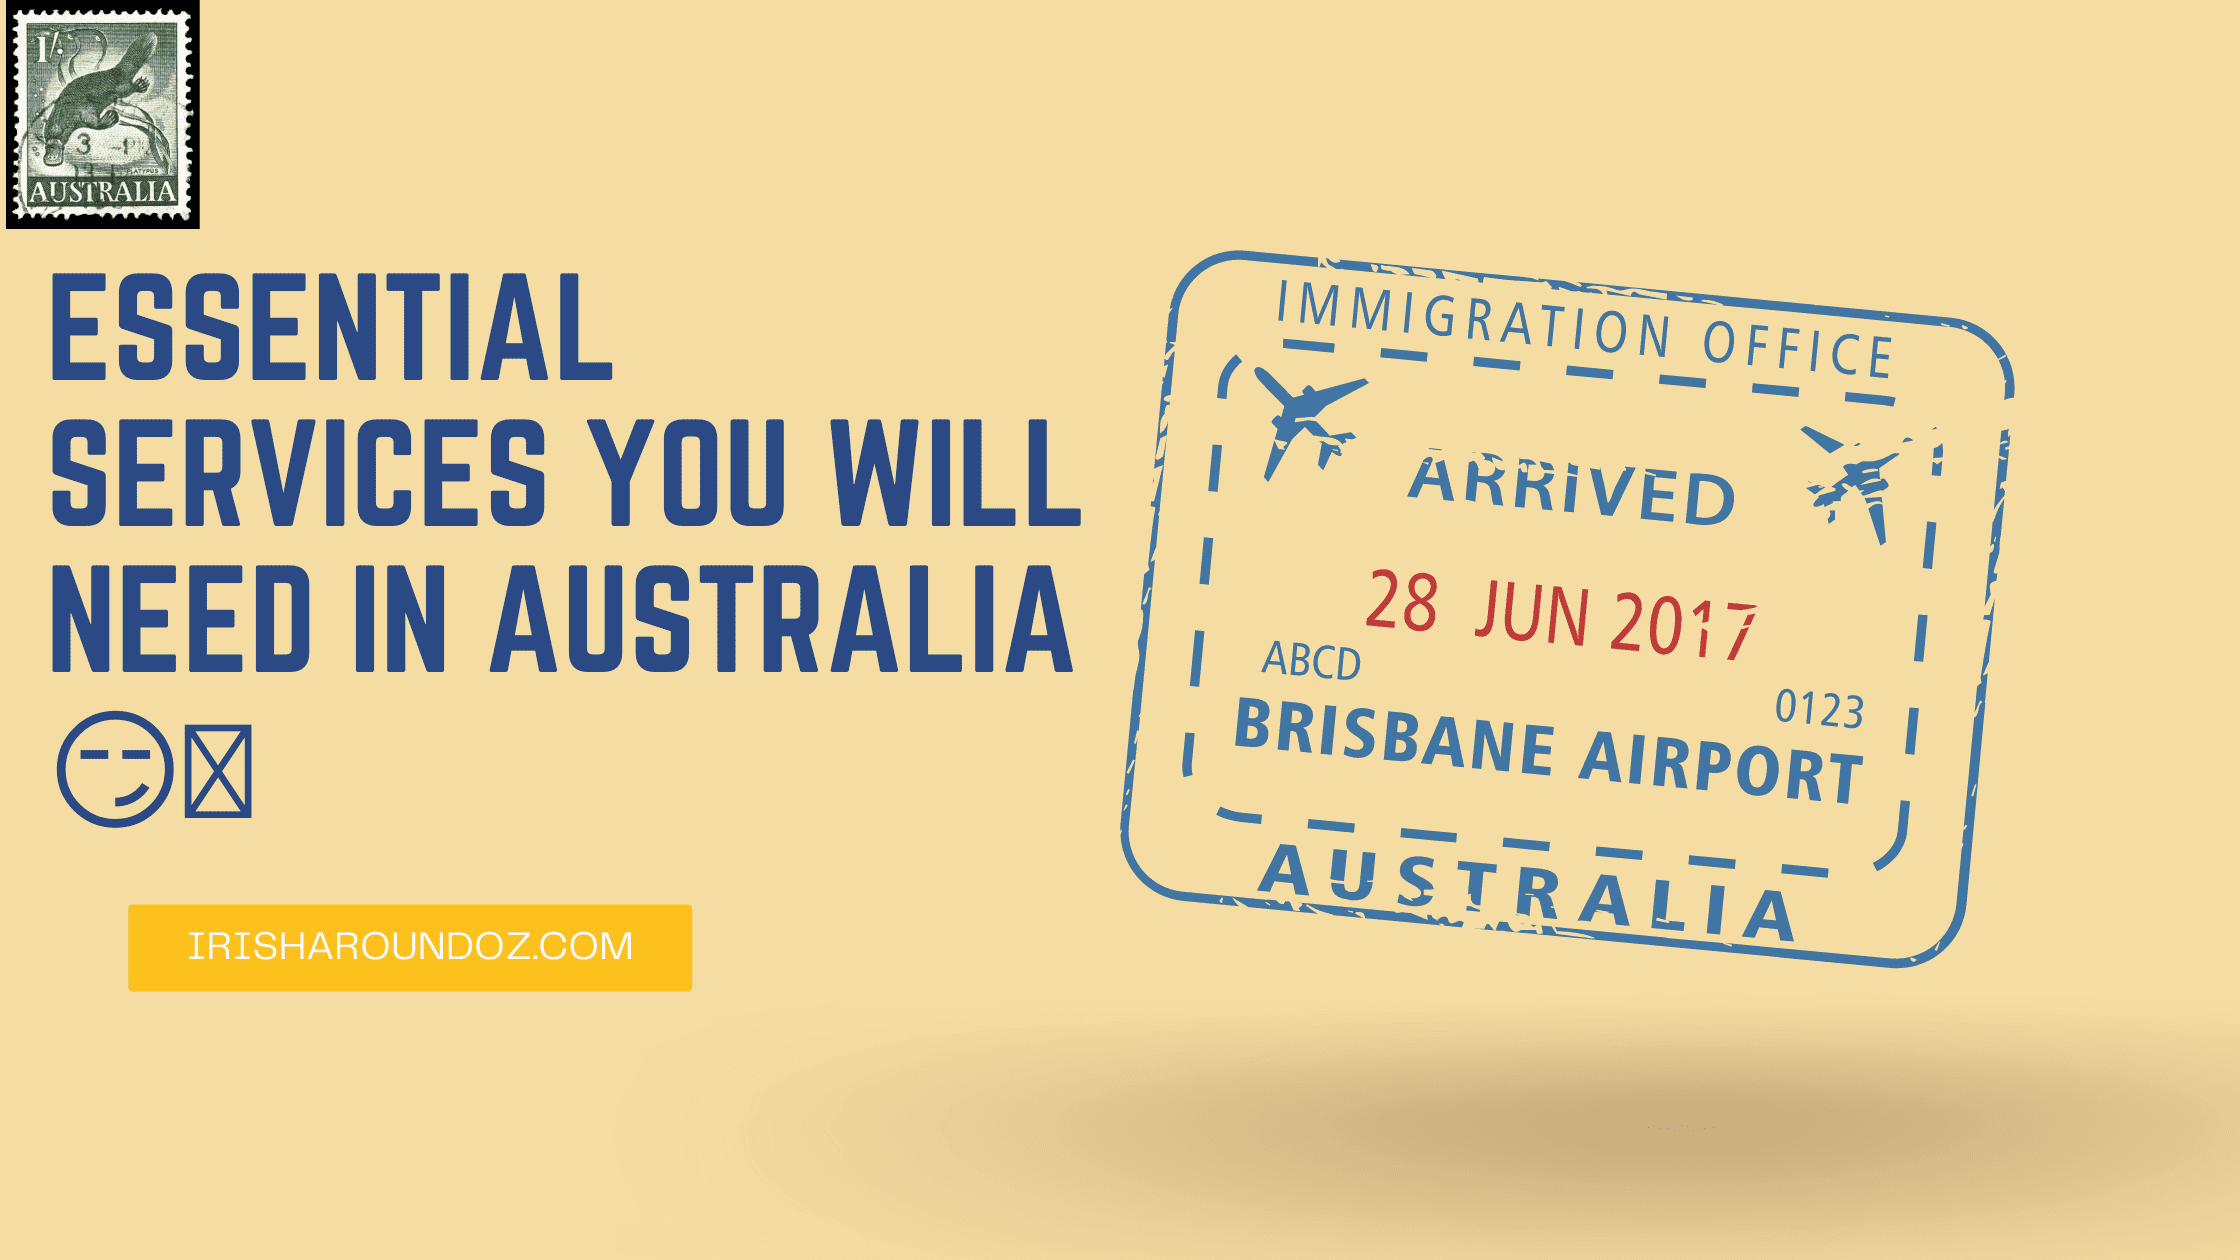 Essential services you will need in Australia